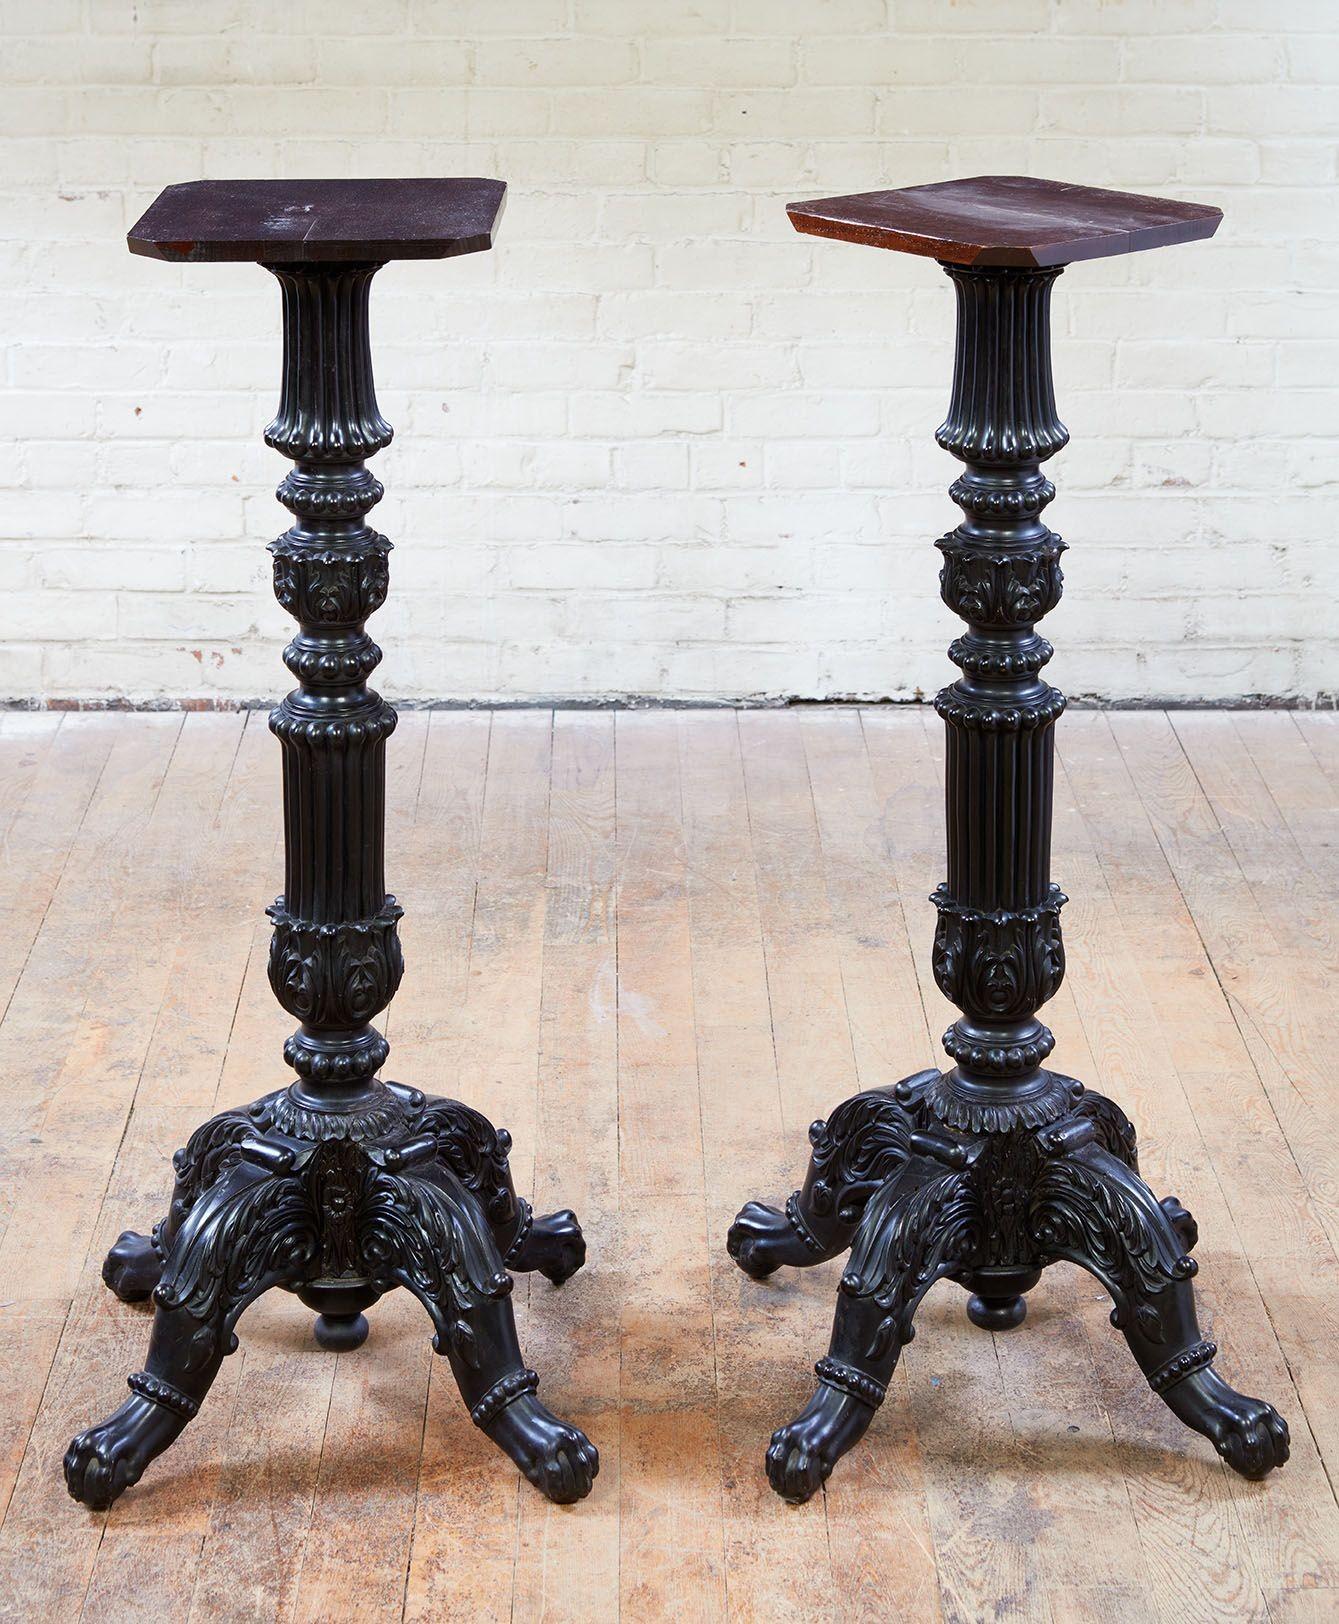 A fine pair of Anglo-Indian ebony pedestals, having circular marble tops over turned and profusely carved and ribbed columns, standing on four acanthus carved cabriole legs ending in lion paw feet. Ceylon, circa 1830.